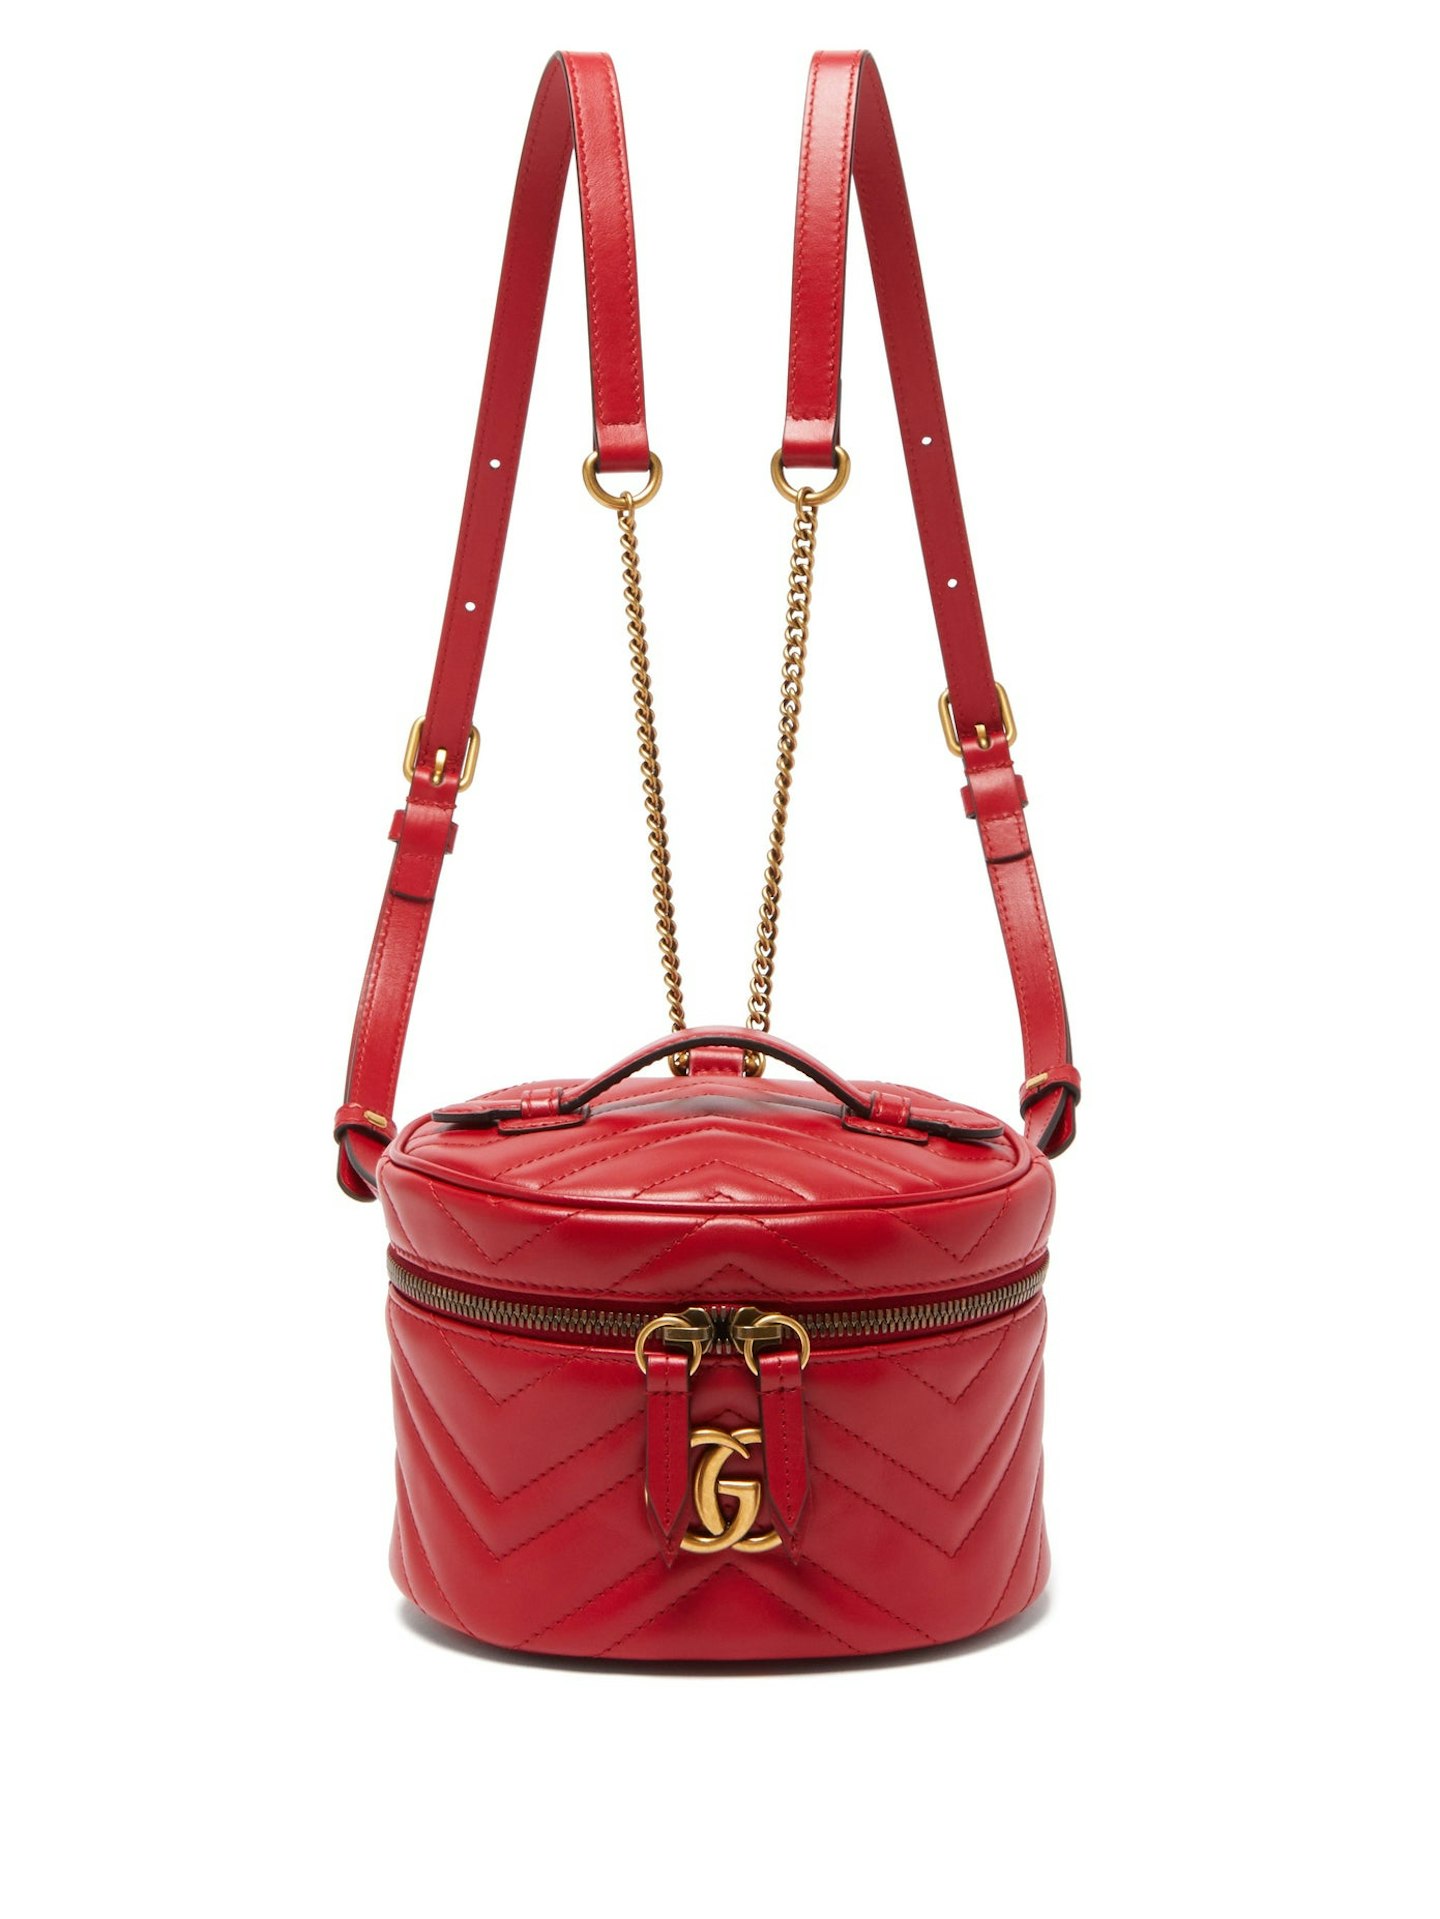 Gucci, GG Marmont Leather Backpack, £865